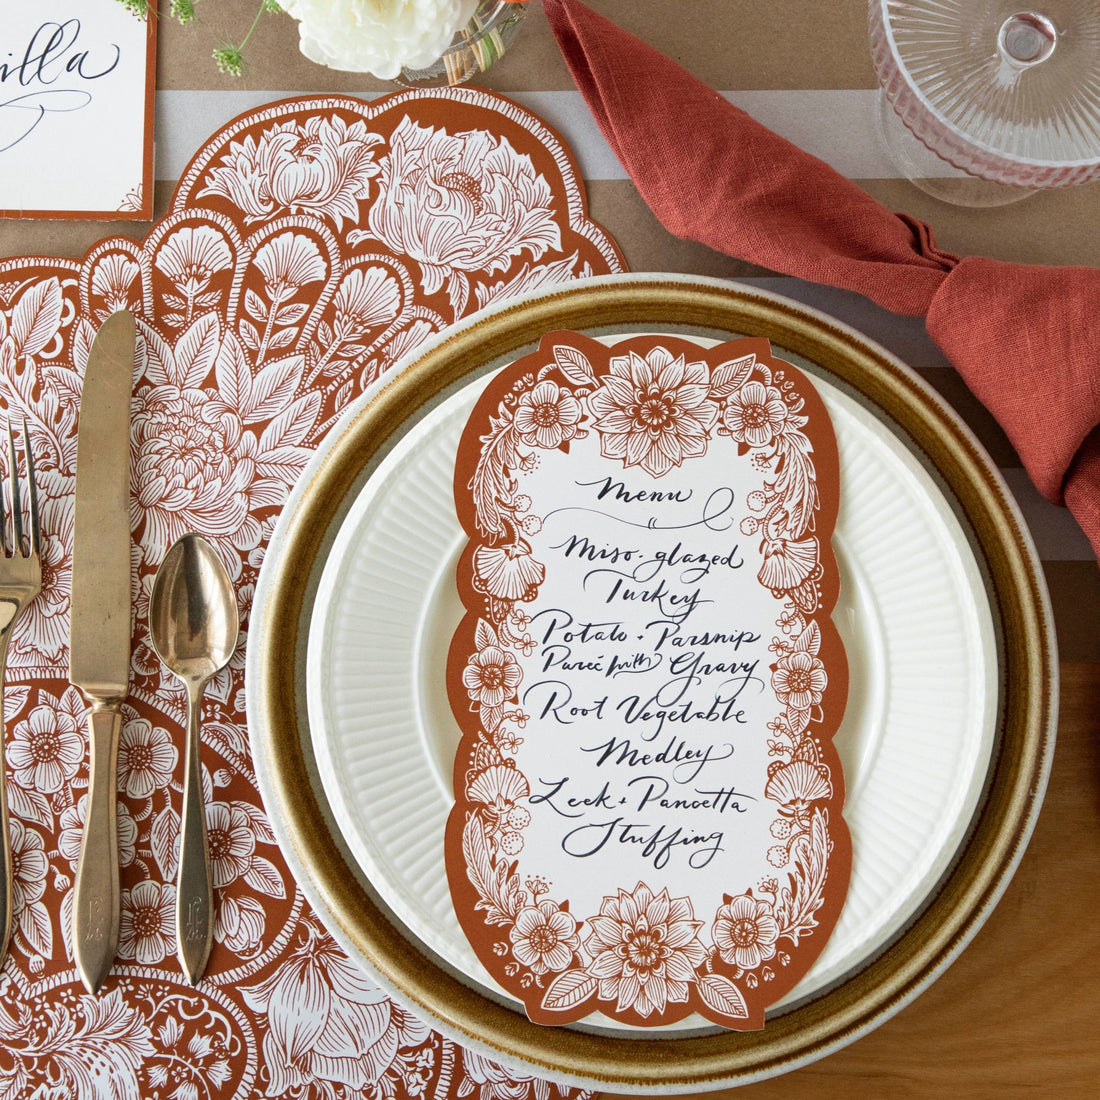 An elegant Fall place setting featuring a Harvest Blooms Table Card with a menu written on it resting on the plate.